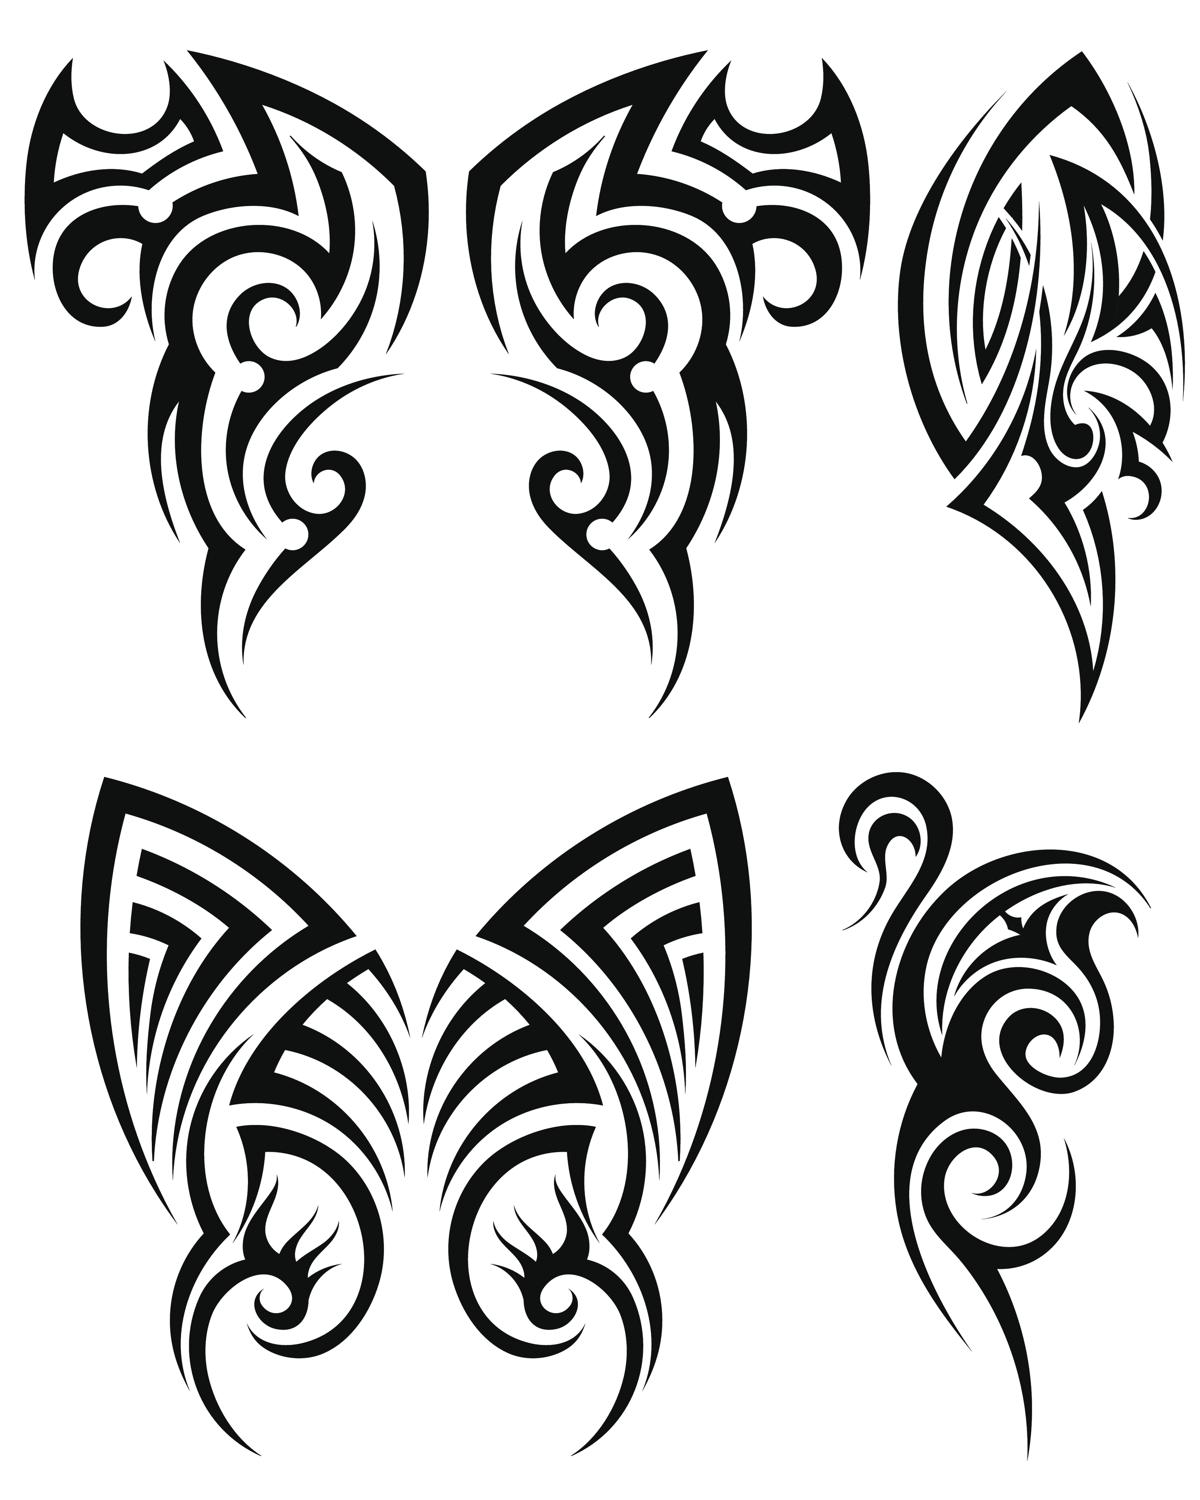 Tribal Tattoos for Women - Thoughtful Tattoos